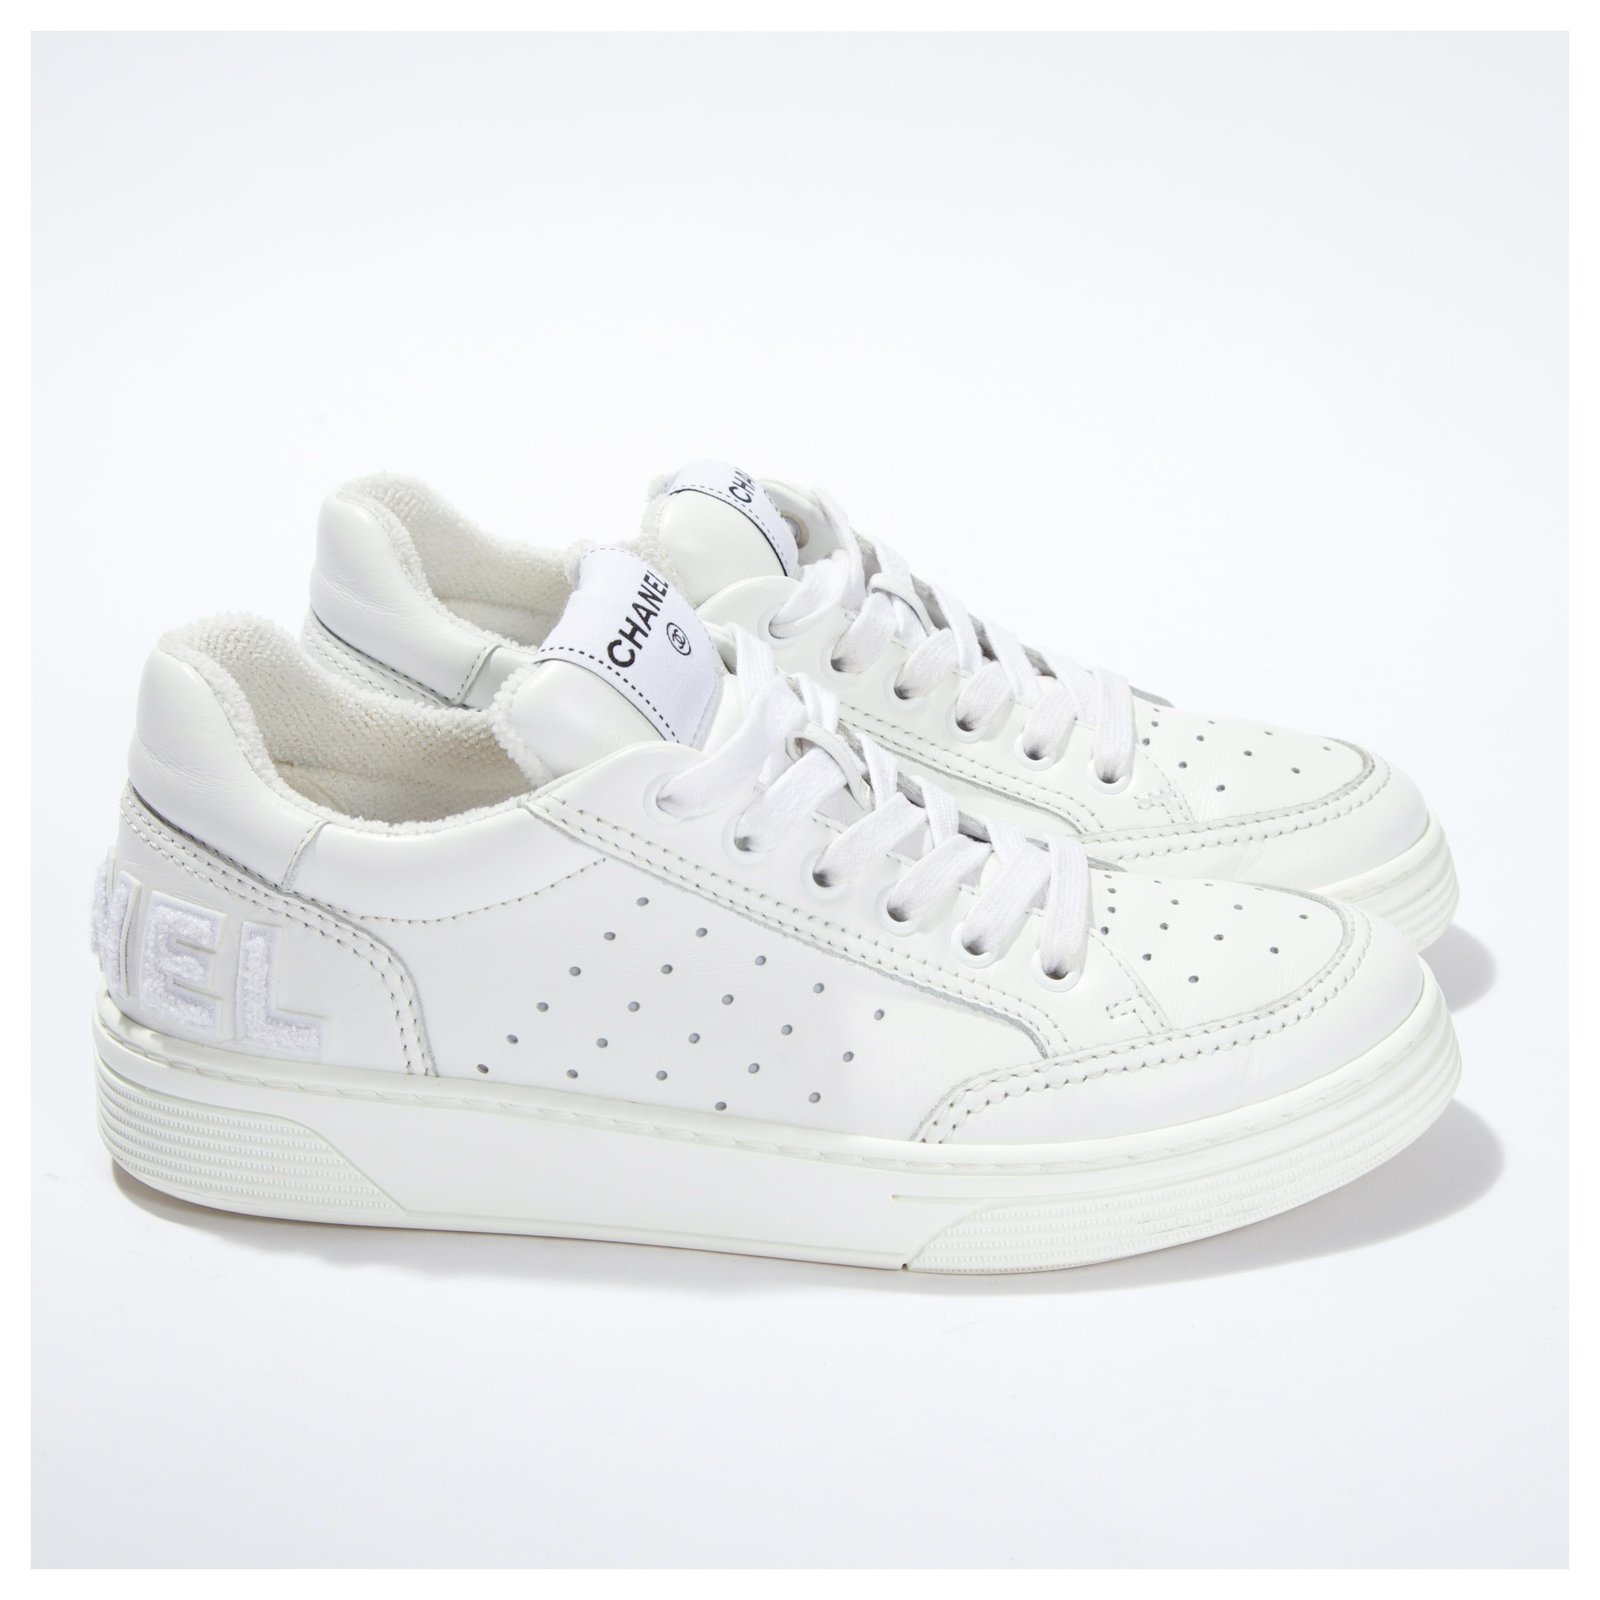 Chanel 20P Sneakers White calf leather Leather Low Top Lace Up Trainers